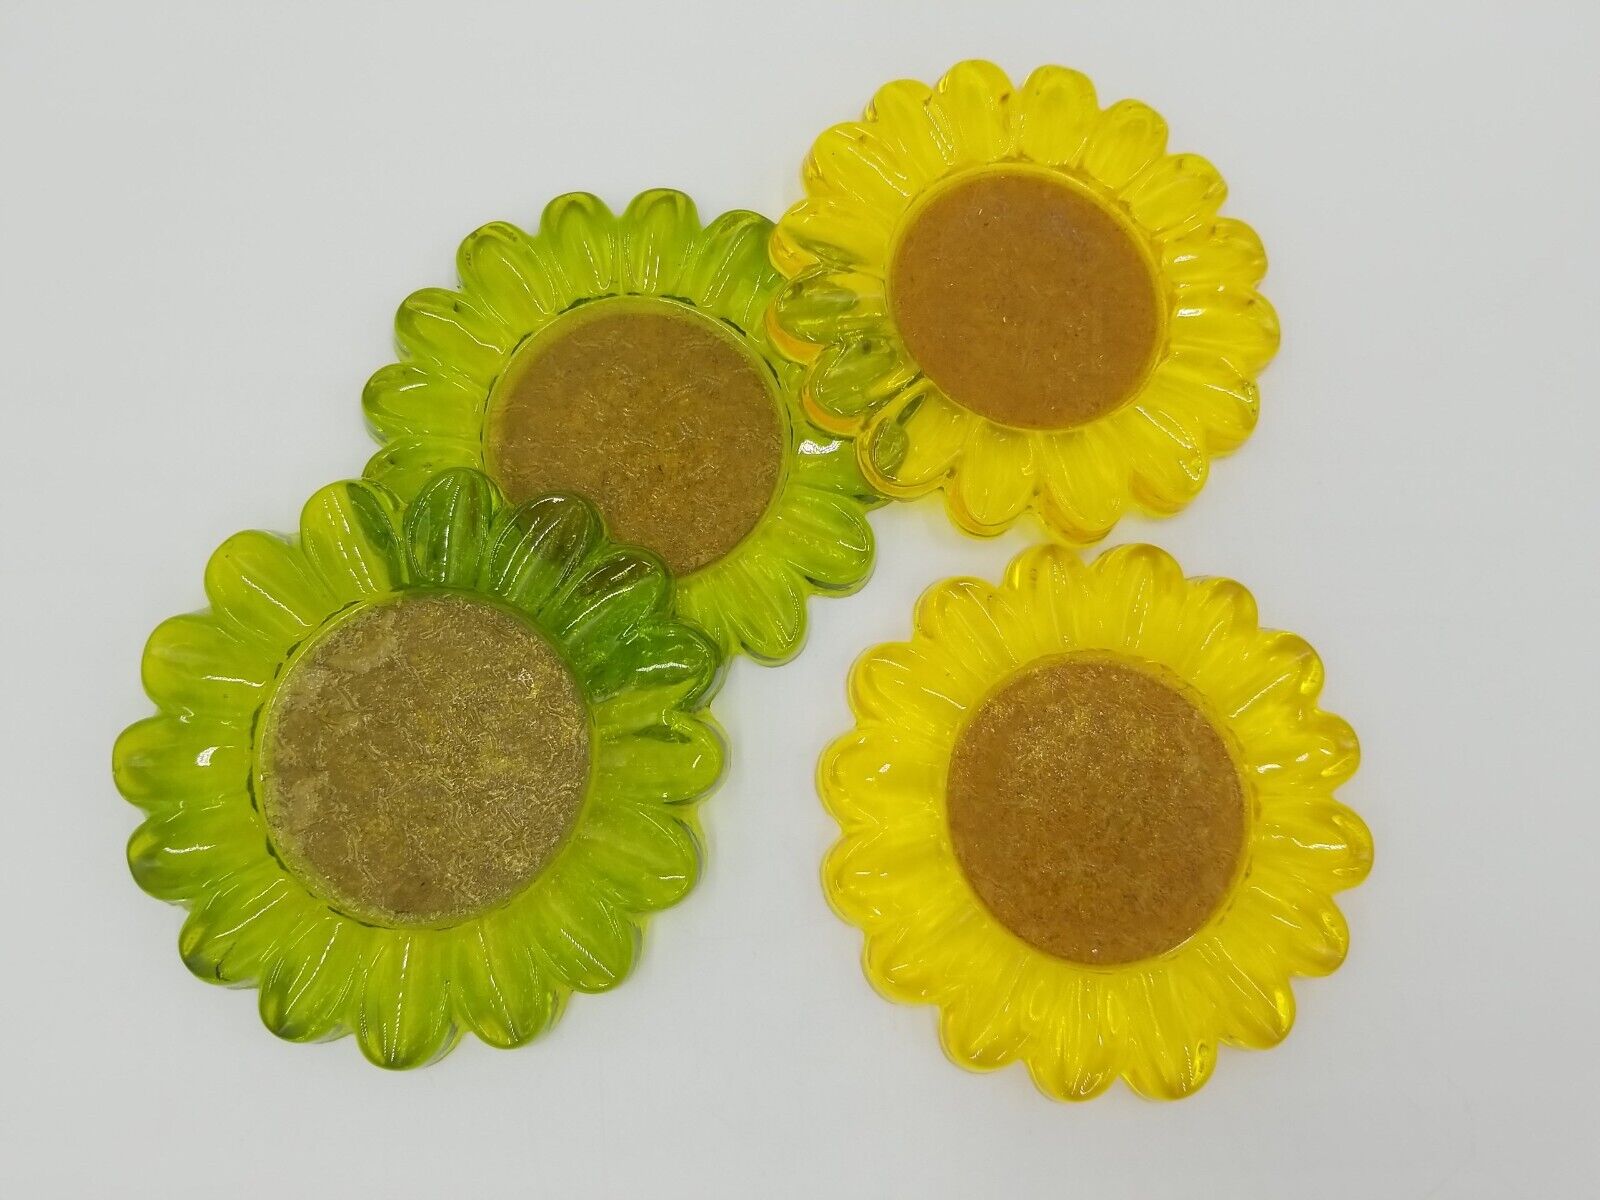 Set of Four Lucite/Acrylic & Cork Daisy Flower Power Green/Yellow Drink Coasters Unbranded